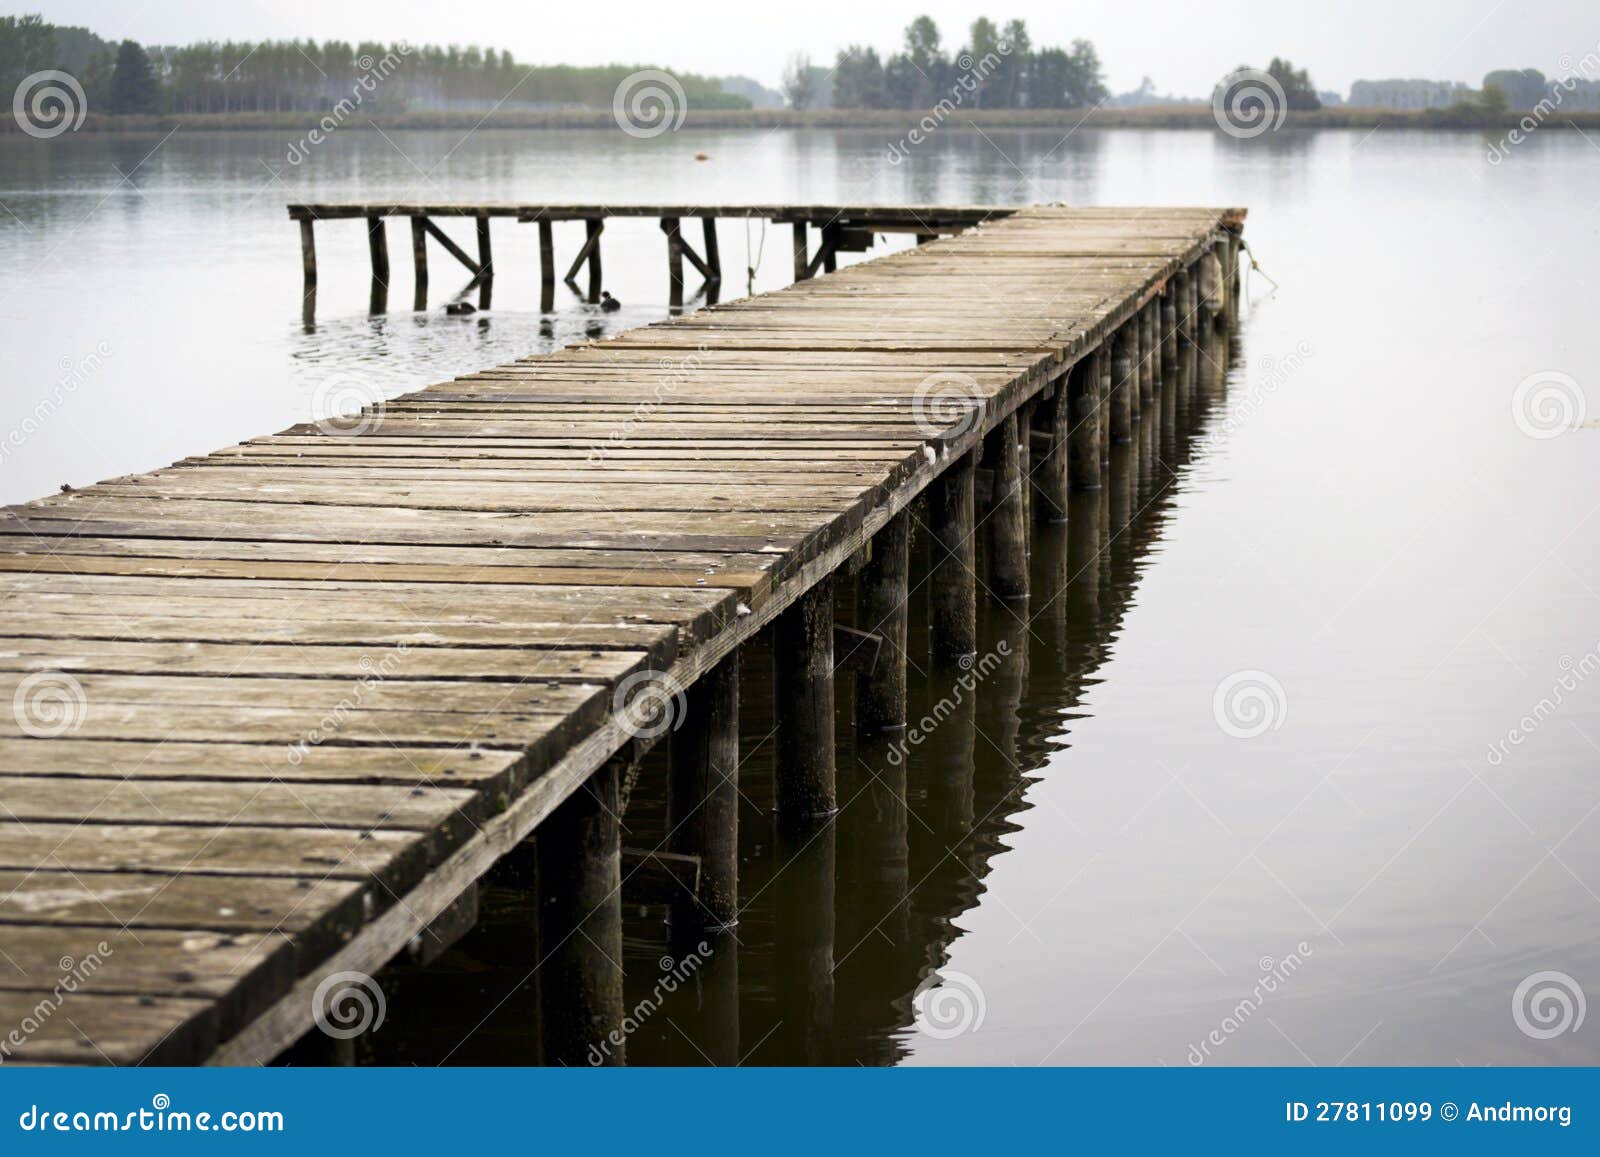 Dock on a lake stock image. Image of clear, nature ...